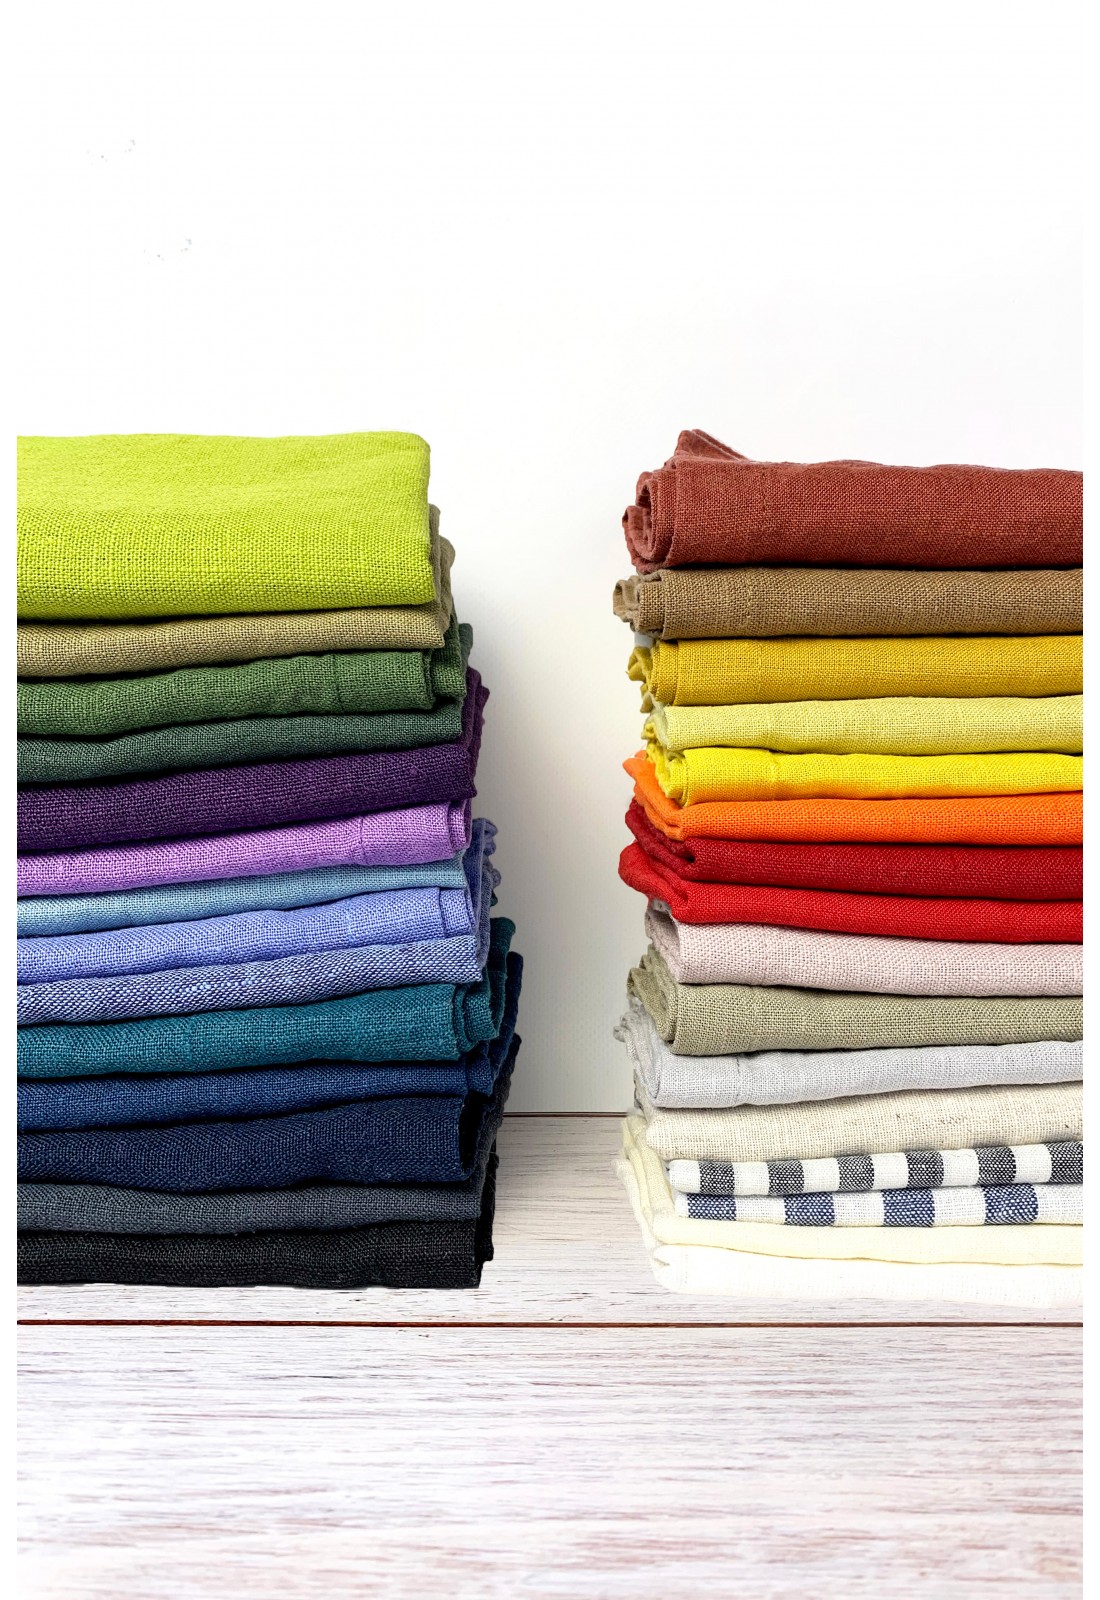 https://www.touchablelinen.com/image/cache/catalog/products/22/Linen-napkins-All-colors-and-sizes-1100x1600.jpg